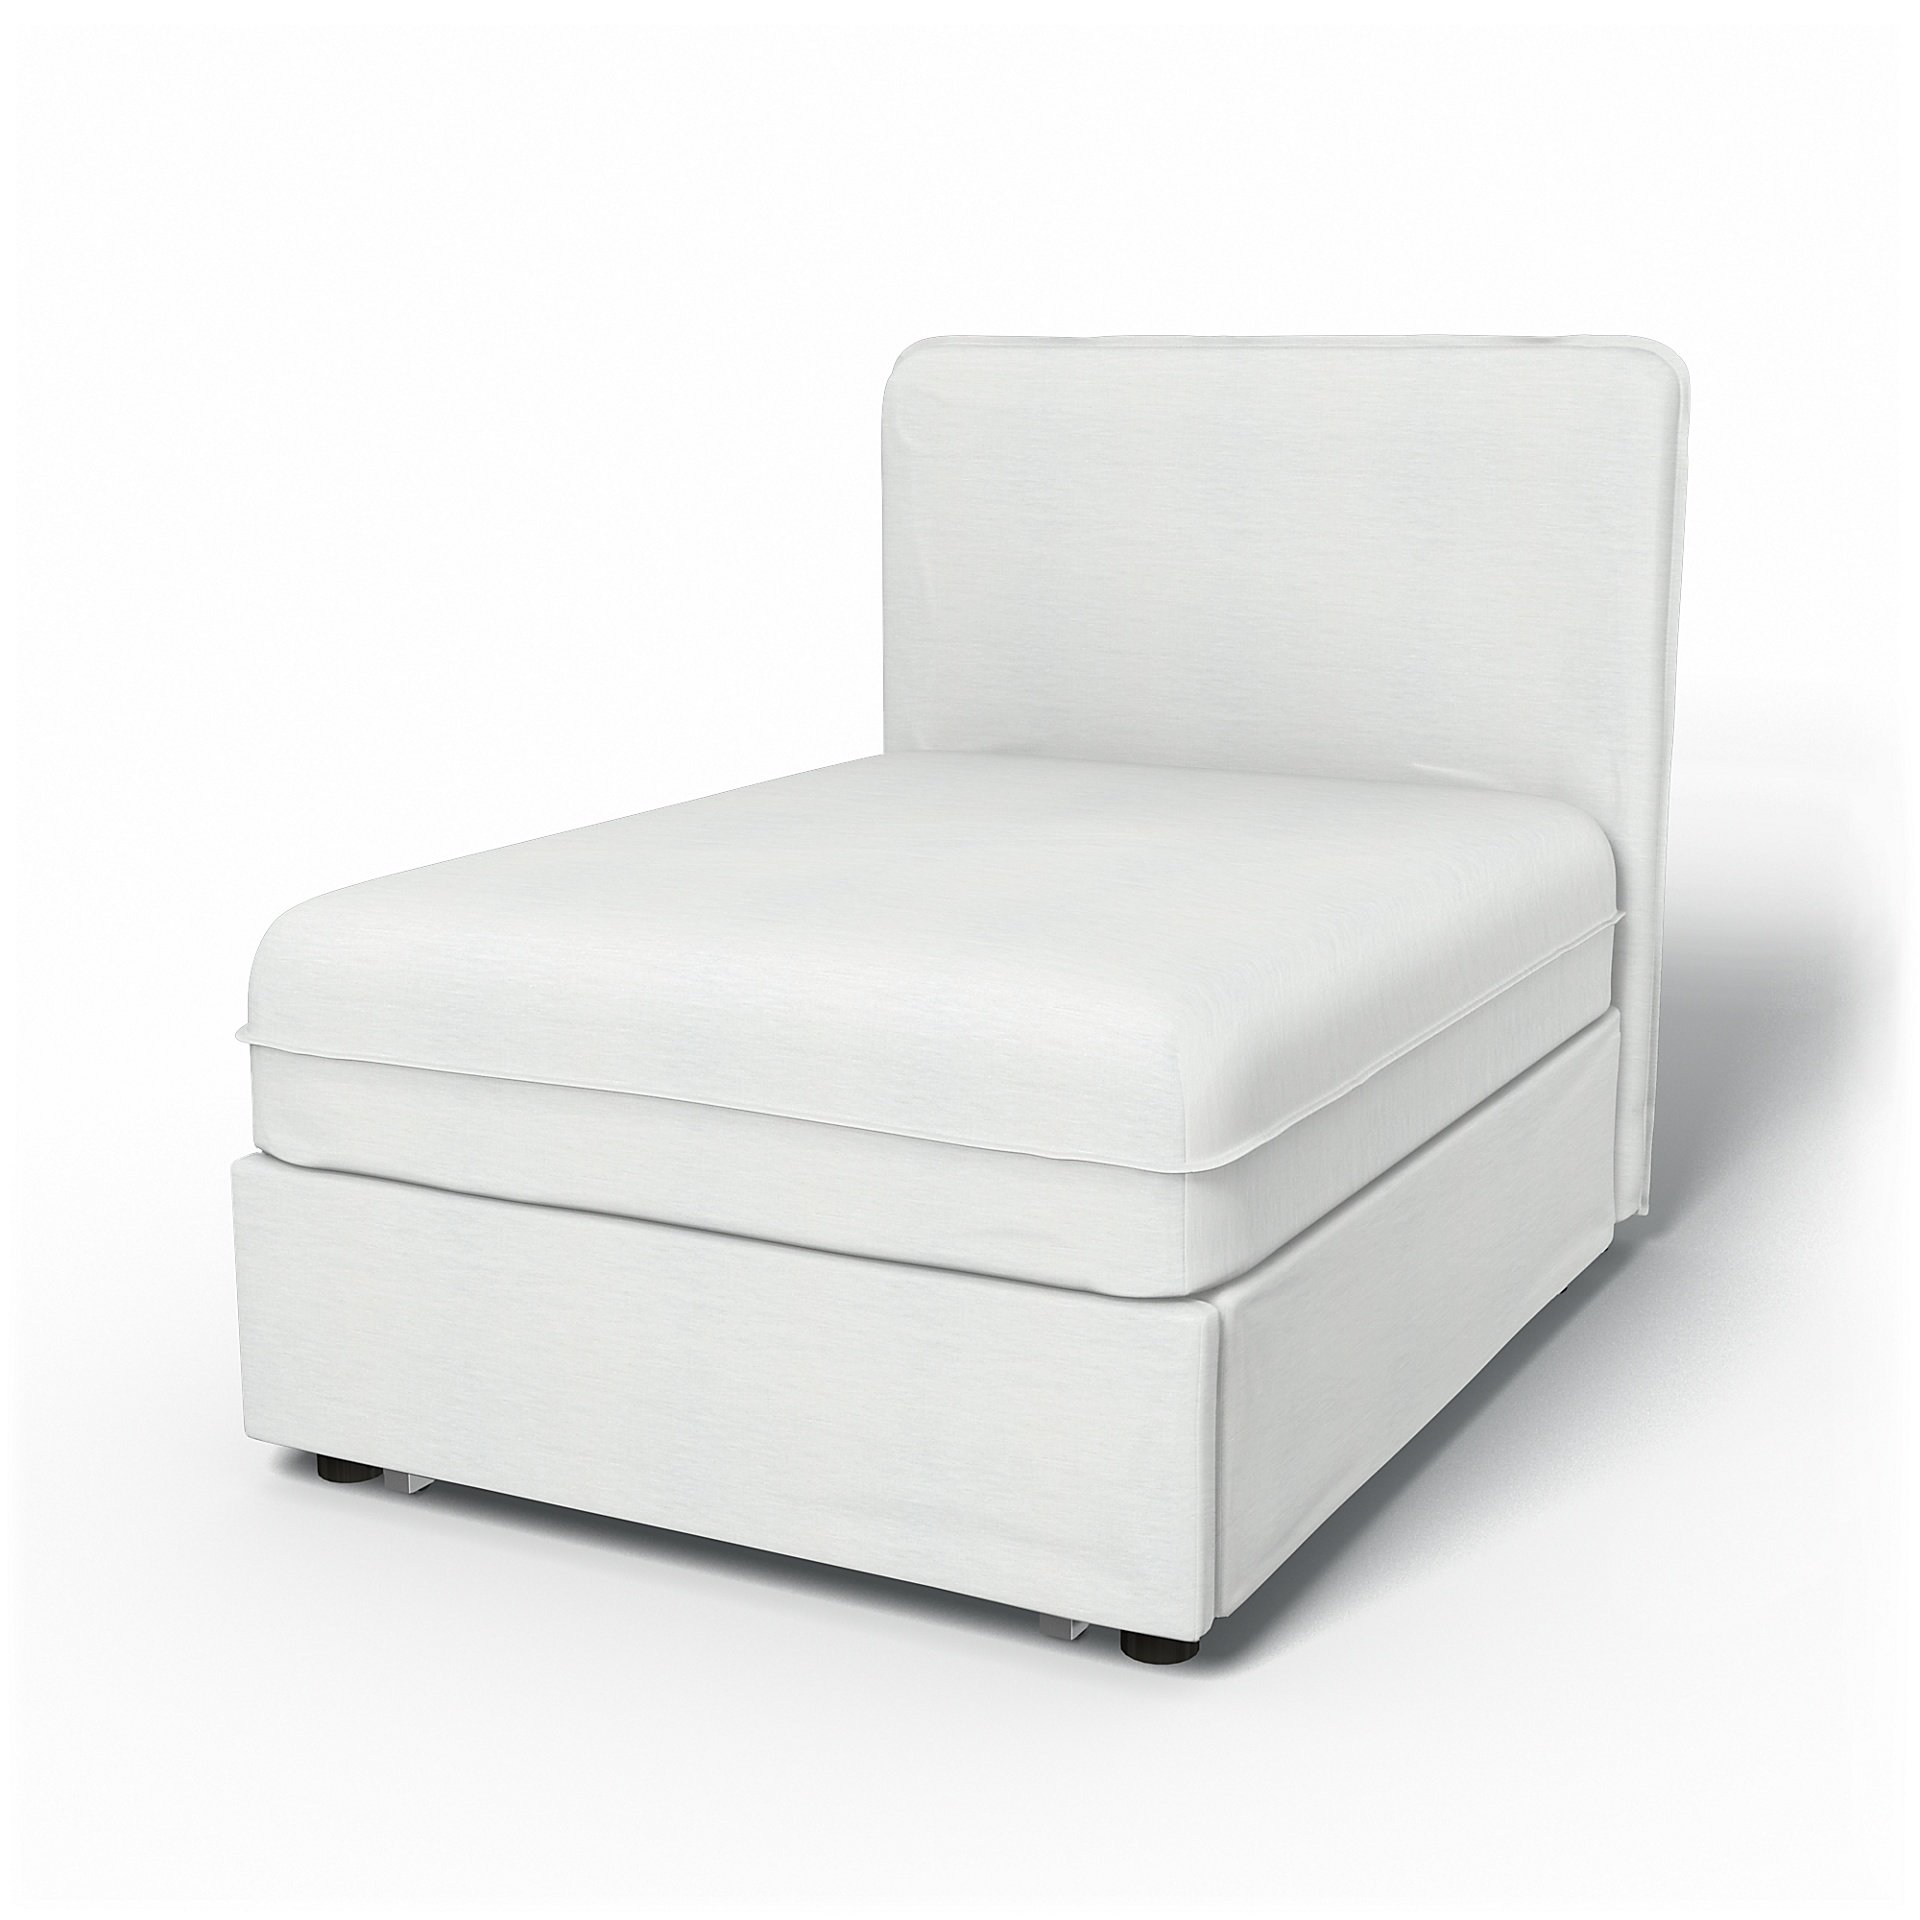 IKEA - Vallentuna Seat Module with Low Back Sofa Bed Cover 80x100 cm 32x39in, White, Linen - Bemz